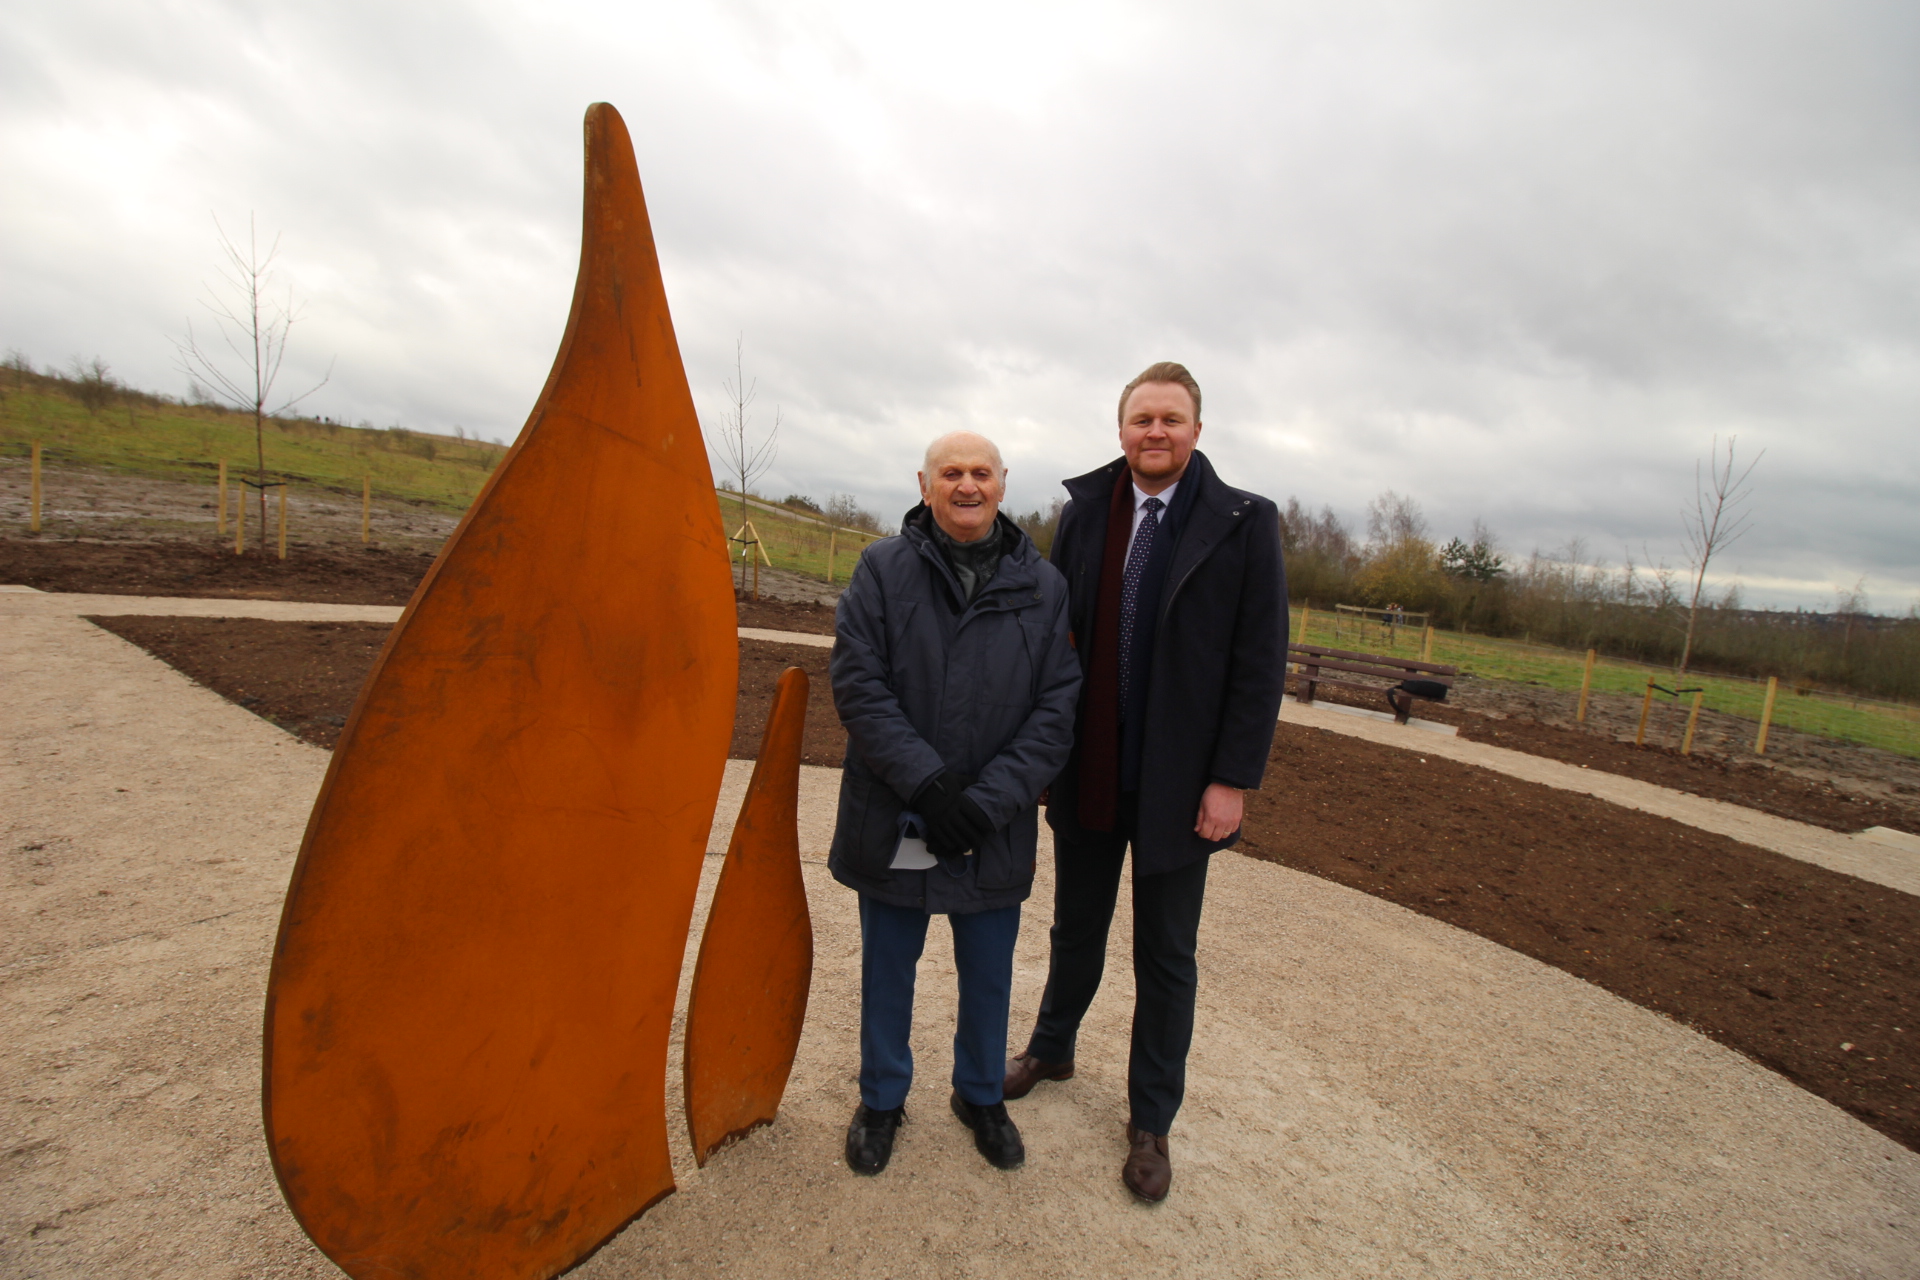 Cllr Payne and Simon Winston stood next in the garden next to the steel flame